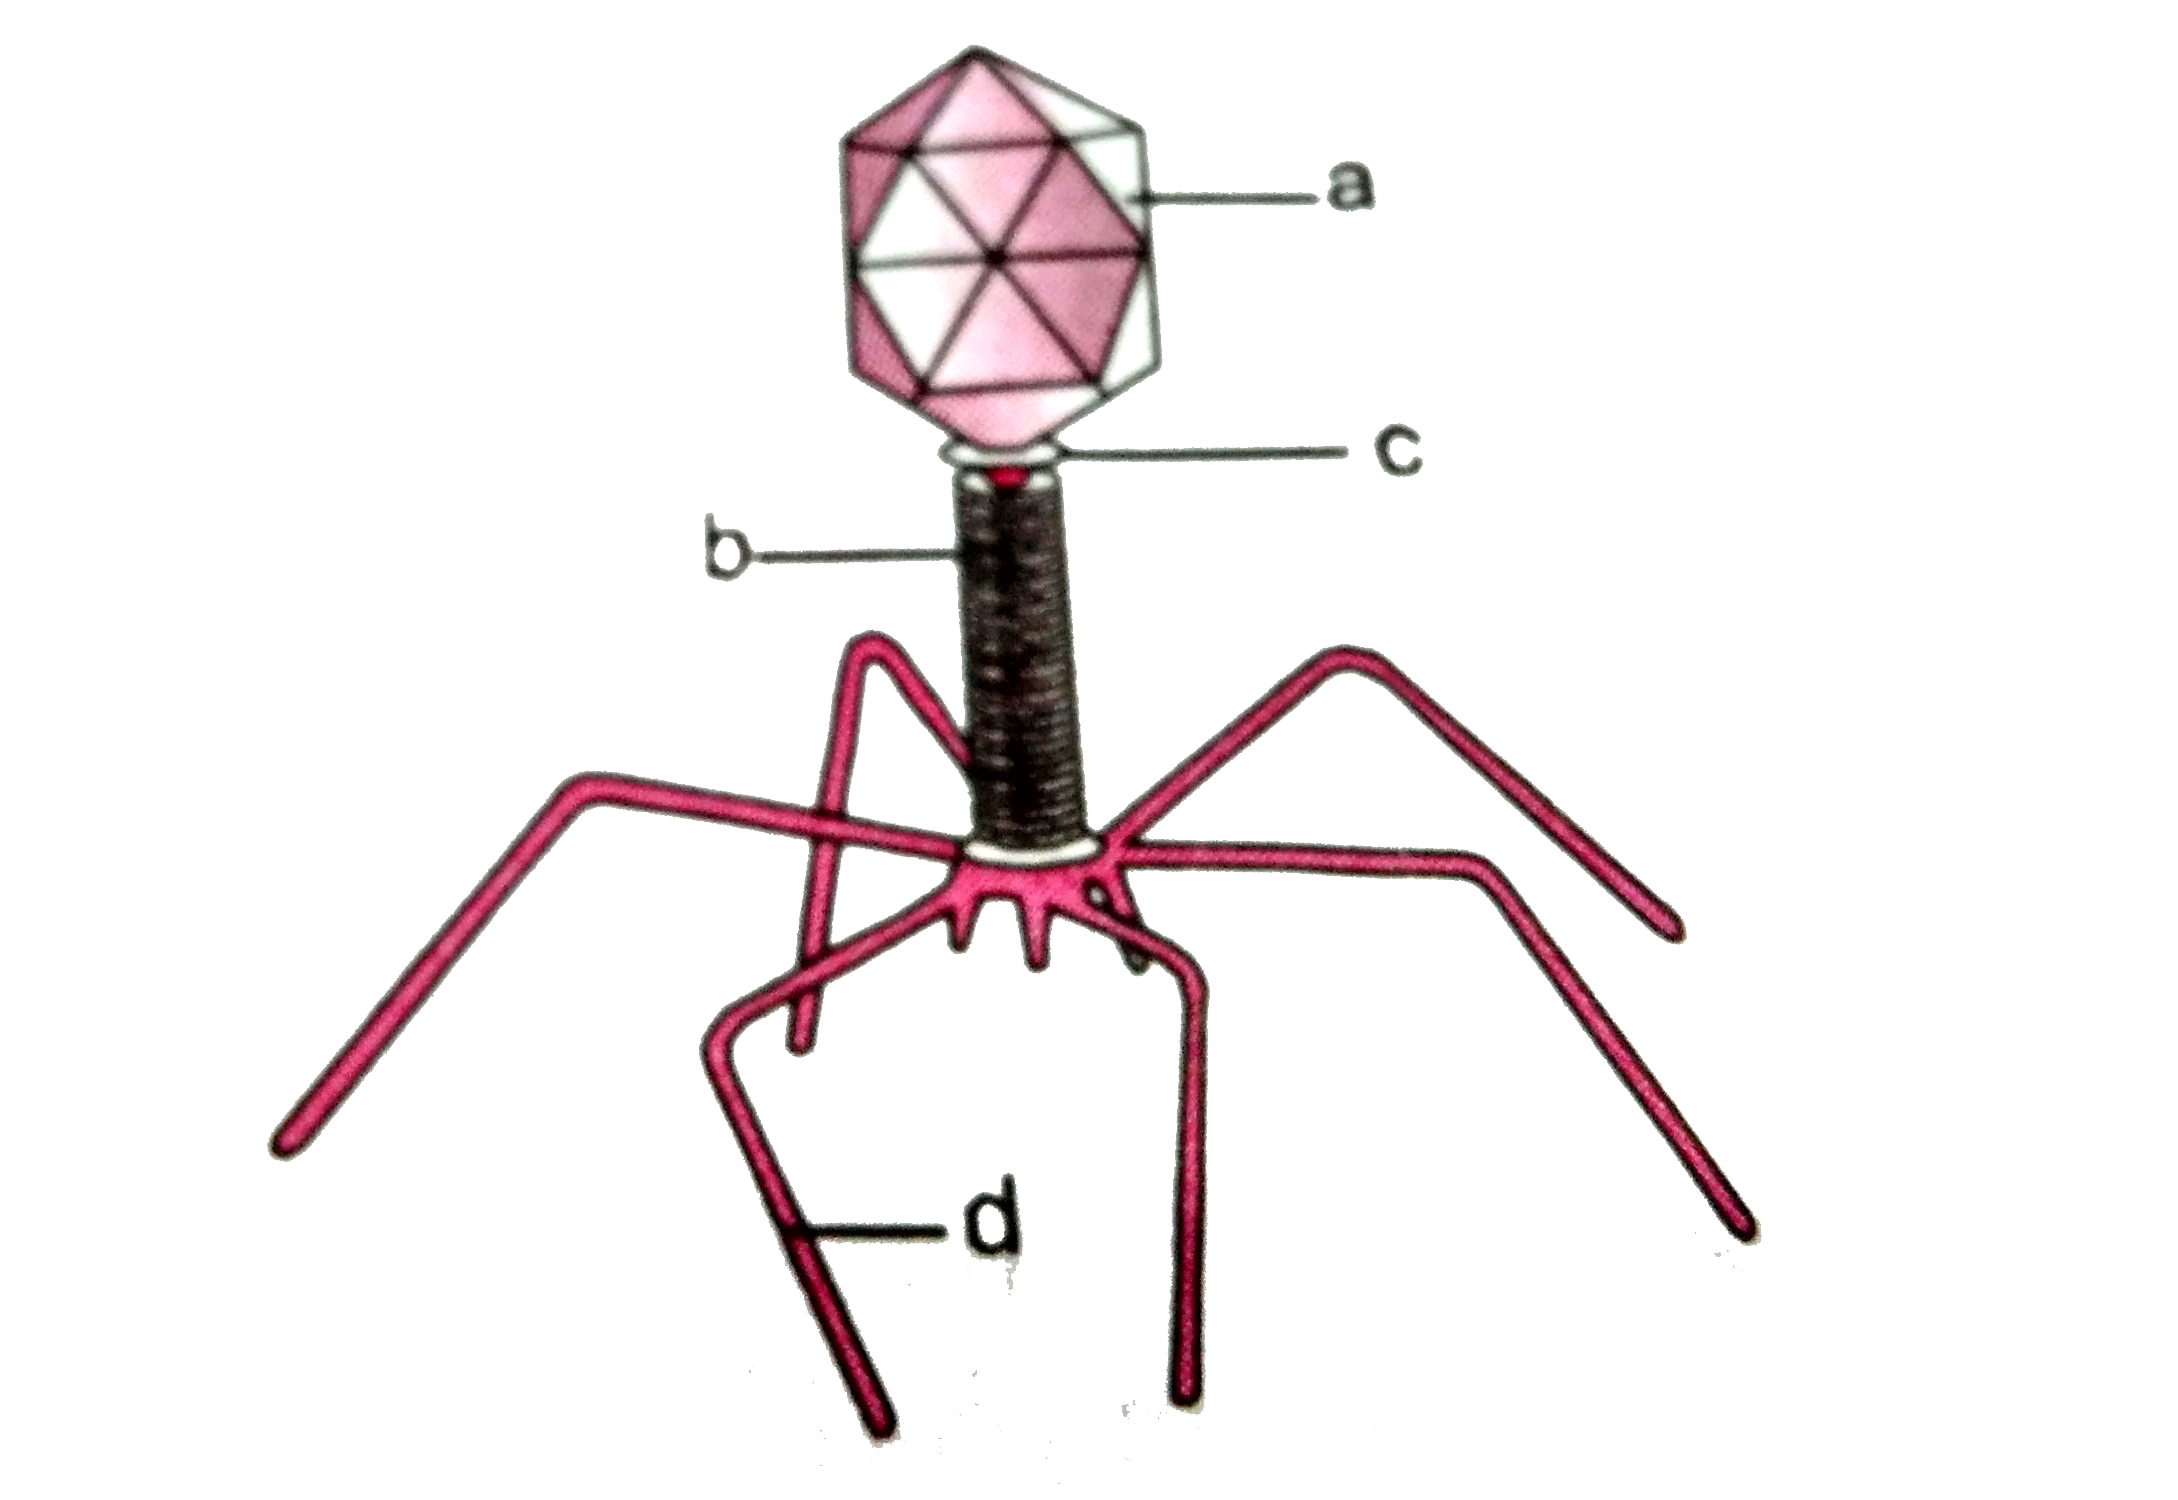 Given is a diagram of a bacteriophage. In which one of the options all the four parts, a, b, c, and d are correct.